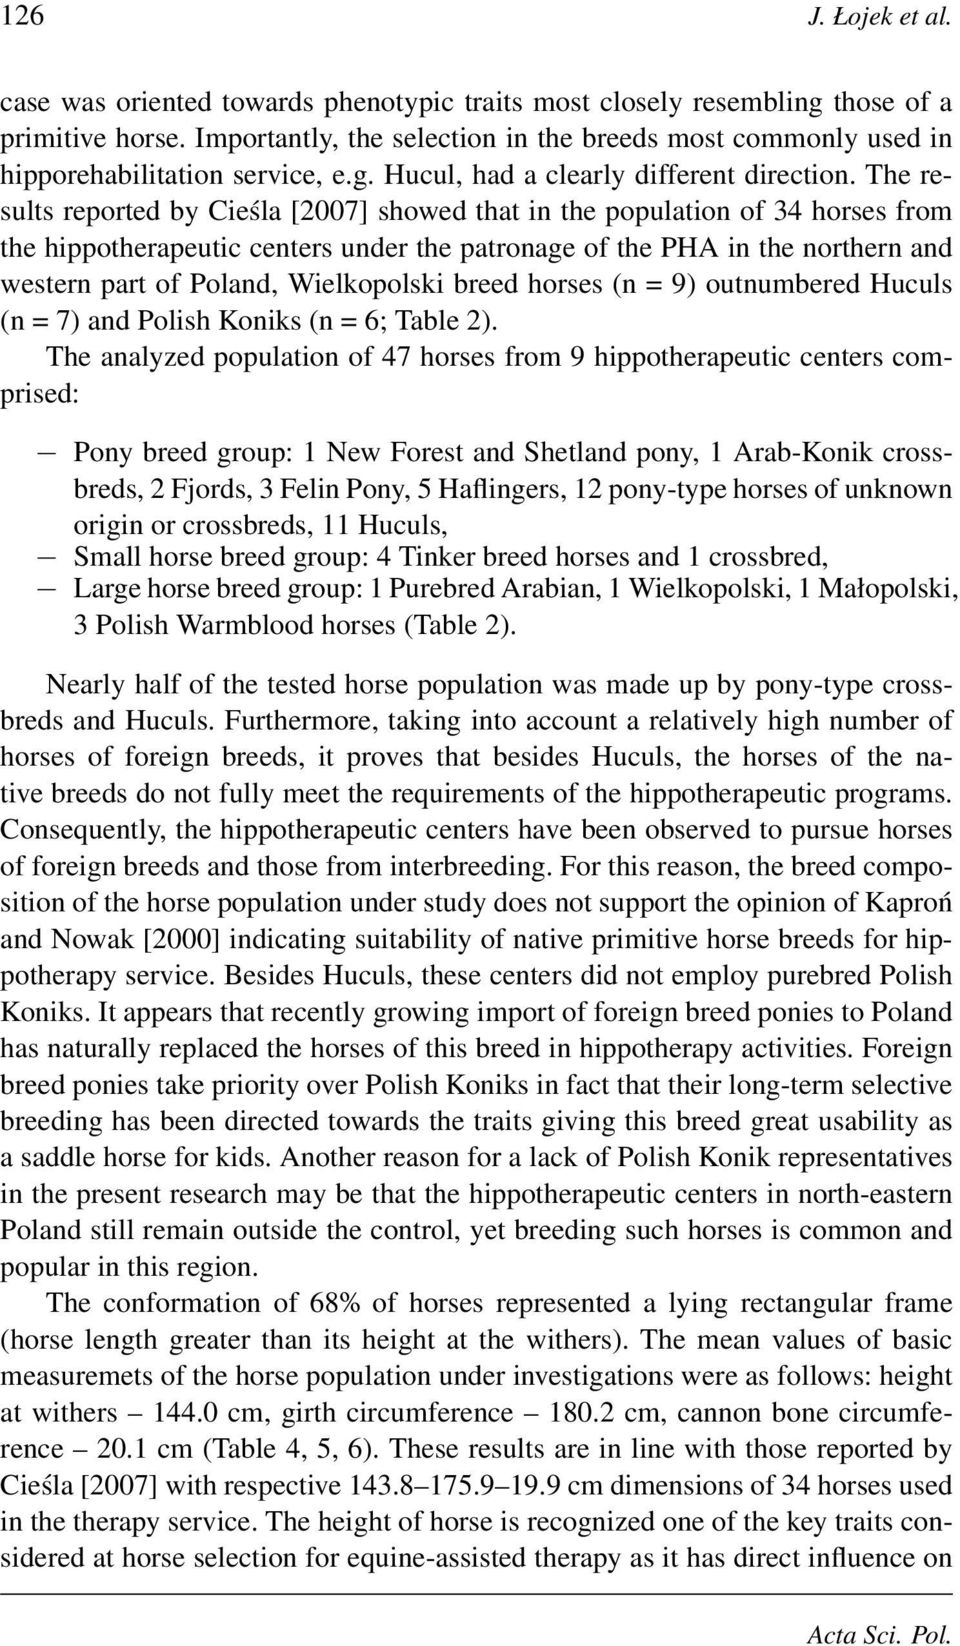 The results reported by Cieśla [2007] showed that in the population of 34 horses from the hippotherapeutic centers under the patronage of the PHA in the northern and western part of Poland,